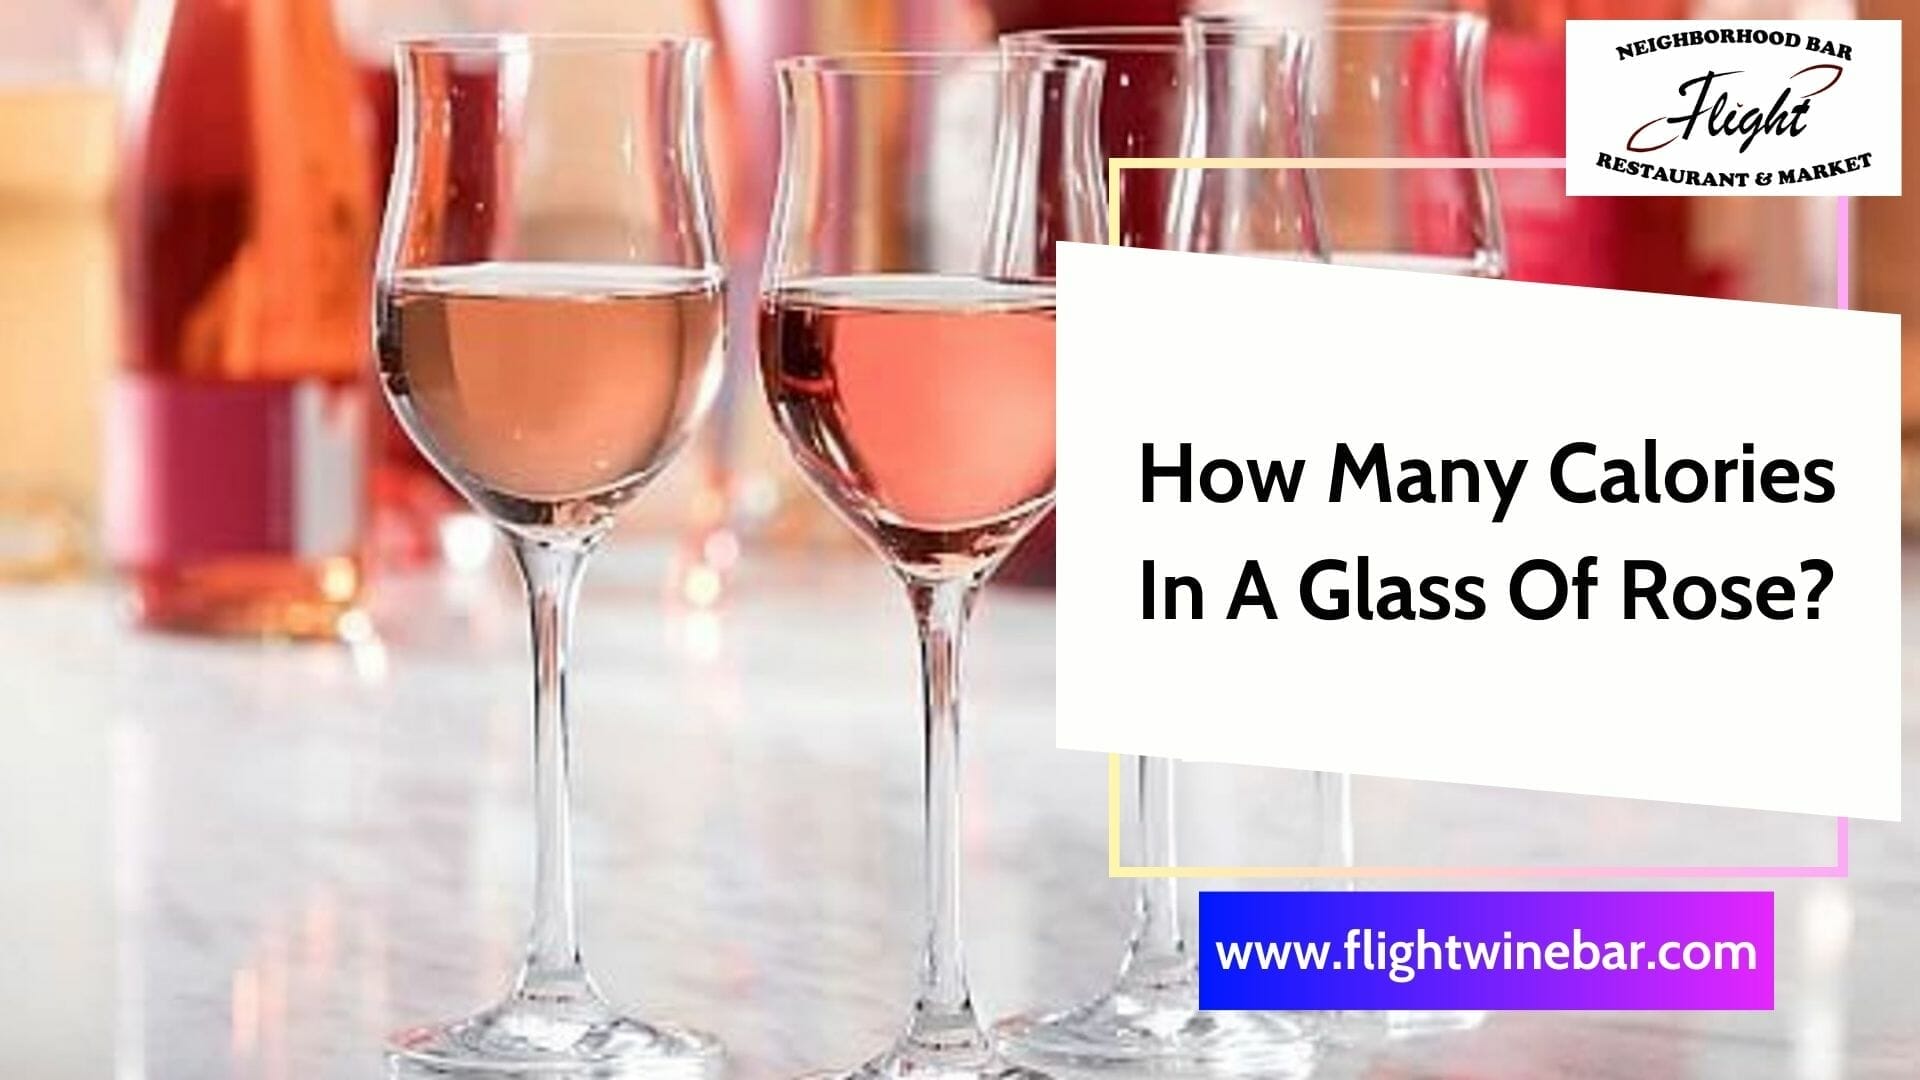 How Many Calories In A Glass Of Rose